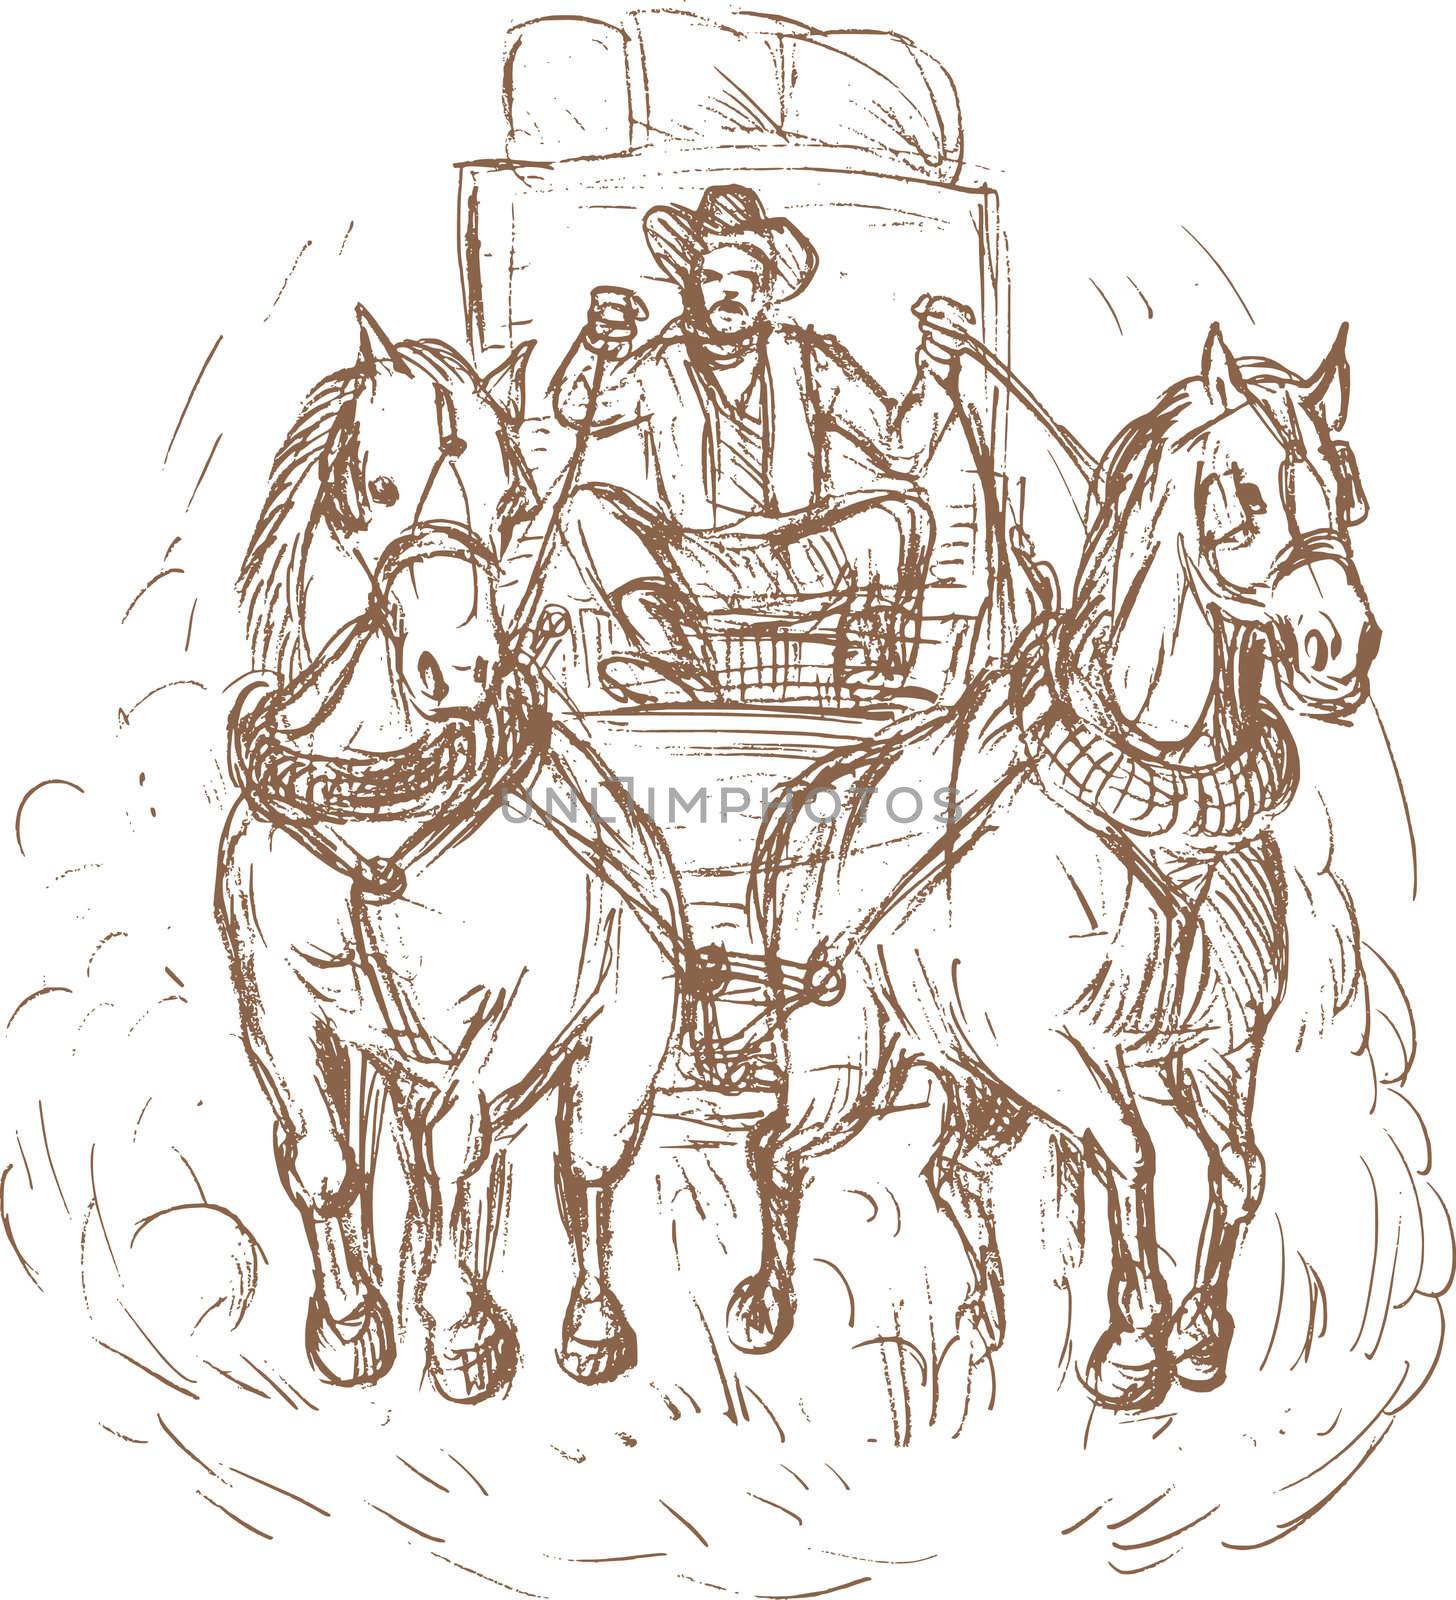 Cowboy stagecoach driver and horses front by patrimonio